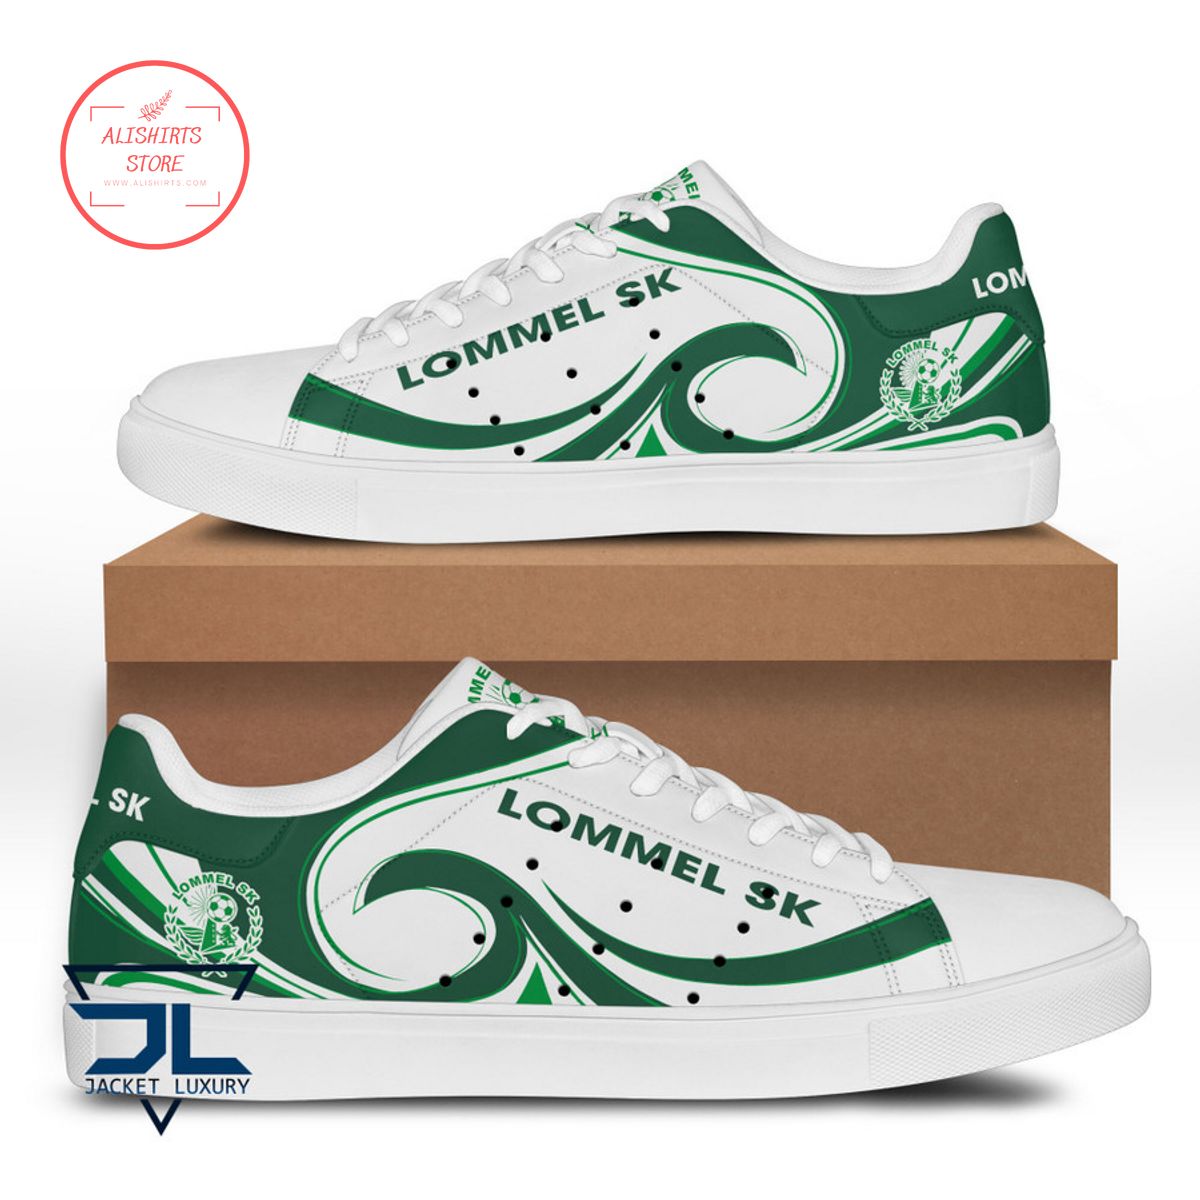 Lommel SK Stan Smith Shoes